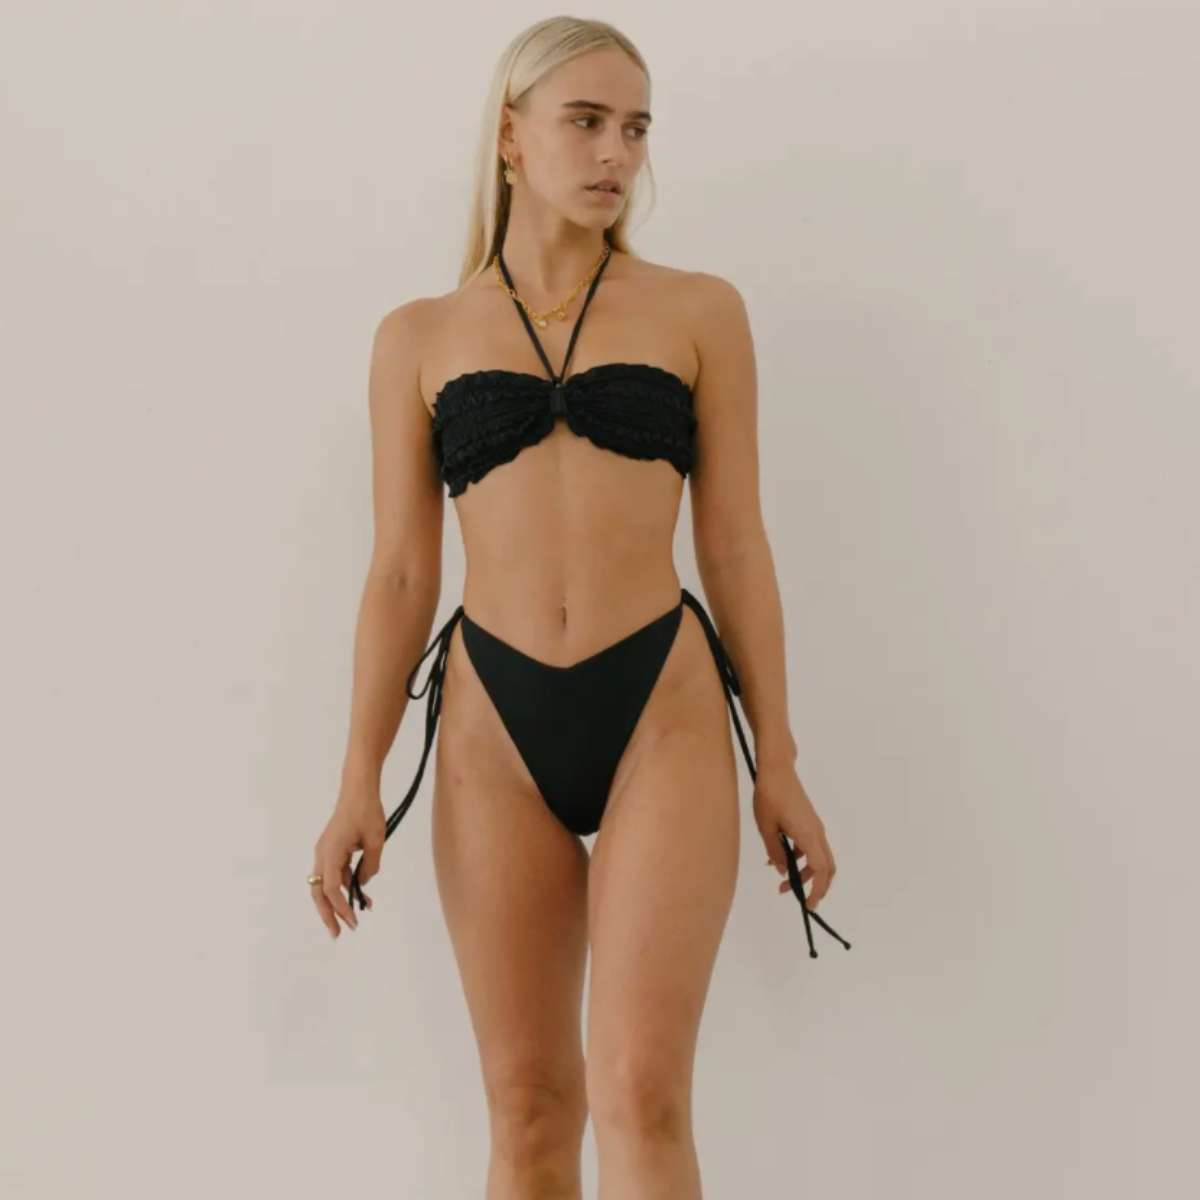 Ziemia Bikini - Black, Smocked Bandeau Top with Optional Halter Tie, by TIALS, Made in Bali, Side Tie Bottoms, Minimal Coverage Bottoms